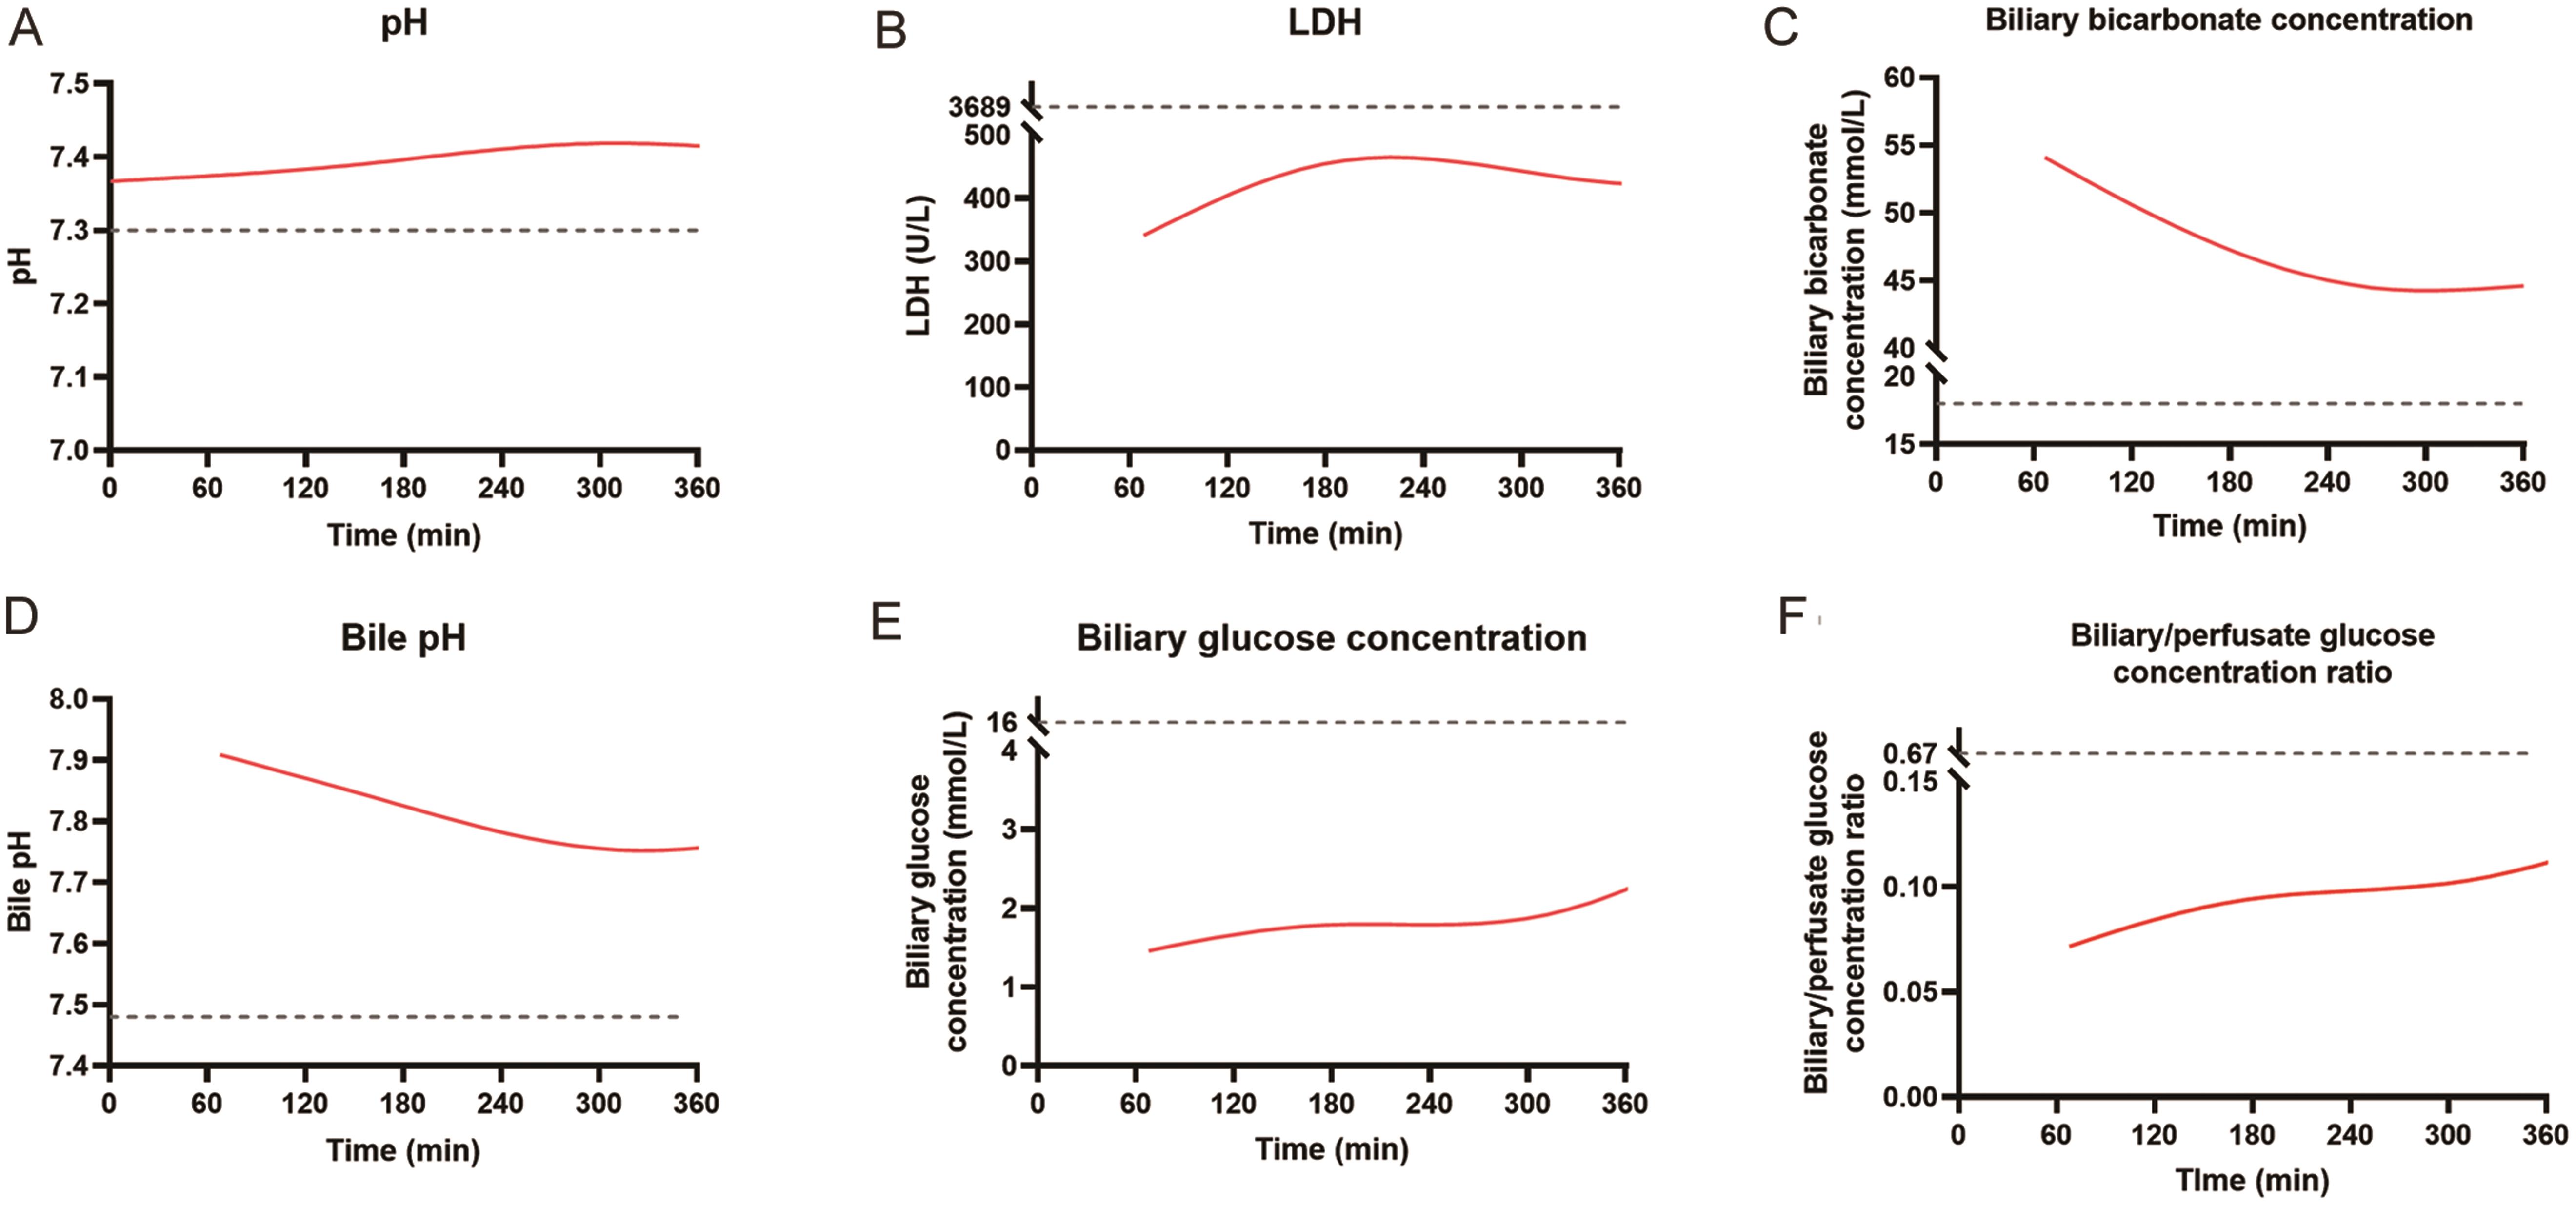 Perfusate and bile duct characteristics of viable donor livers during NMP.